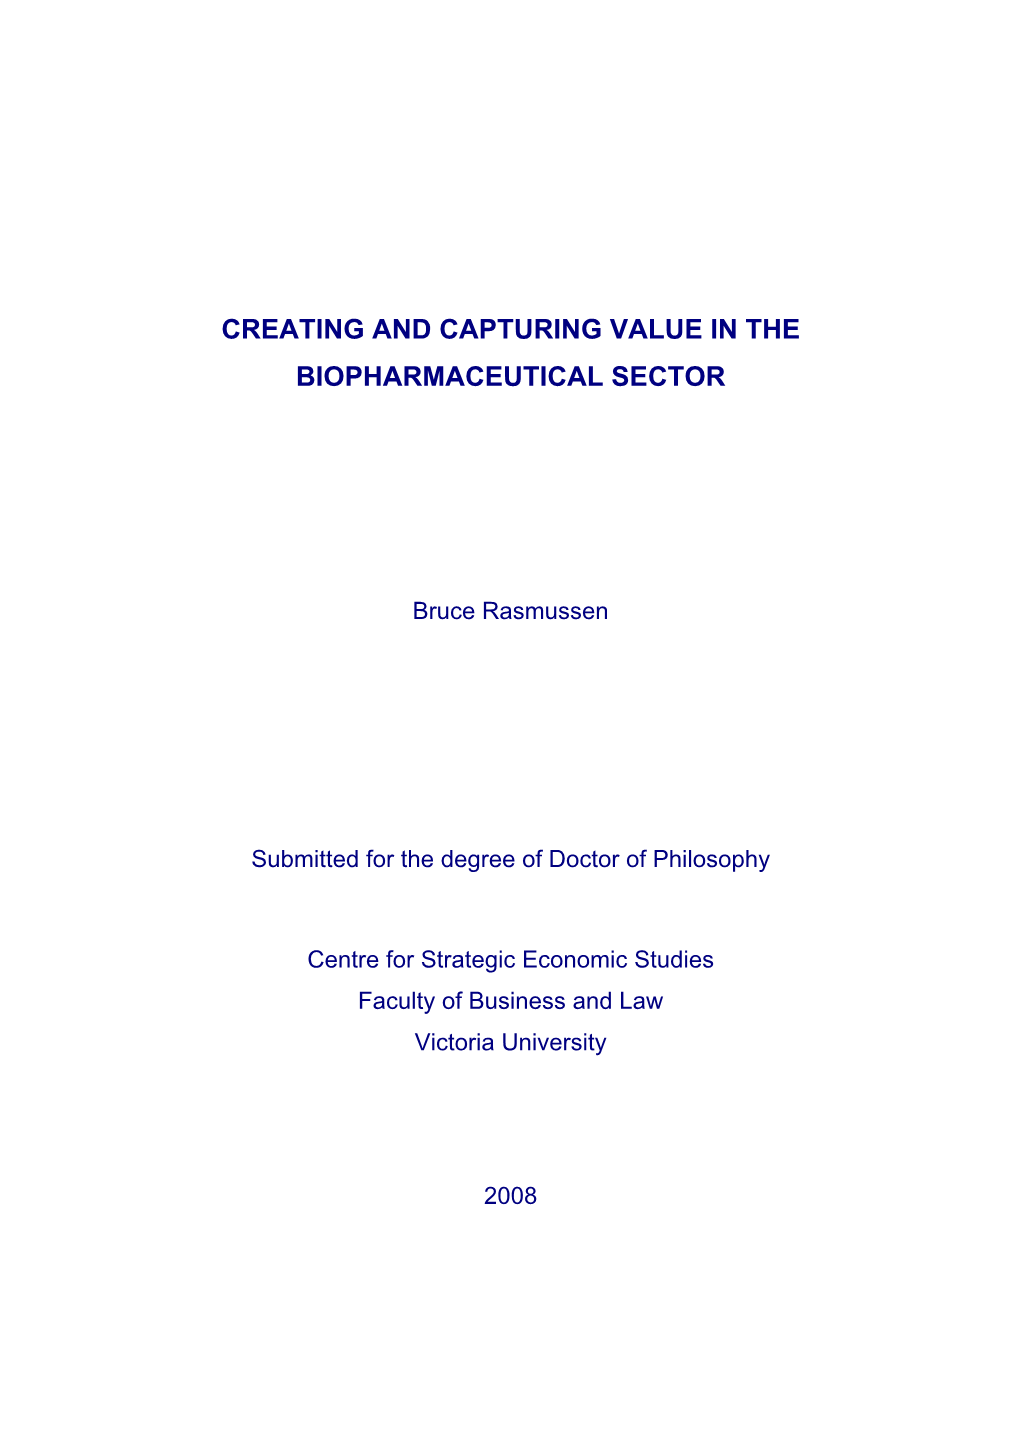 Creating and Capturing Value in the Biopharmaceutical Sector